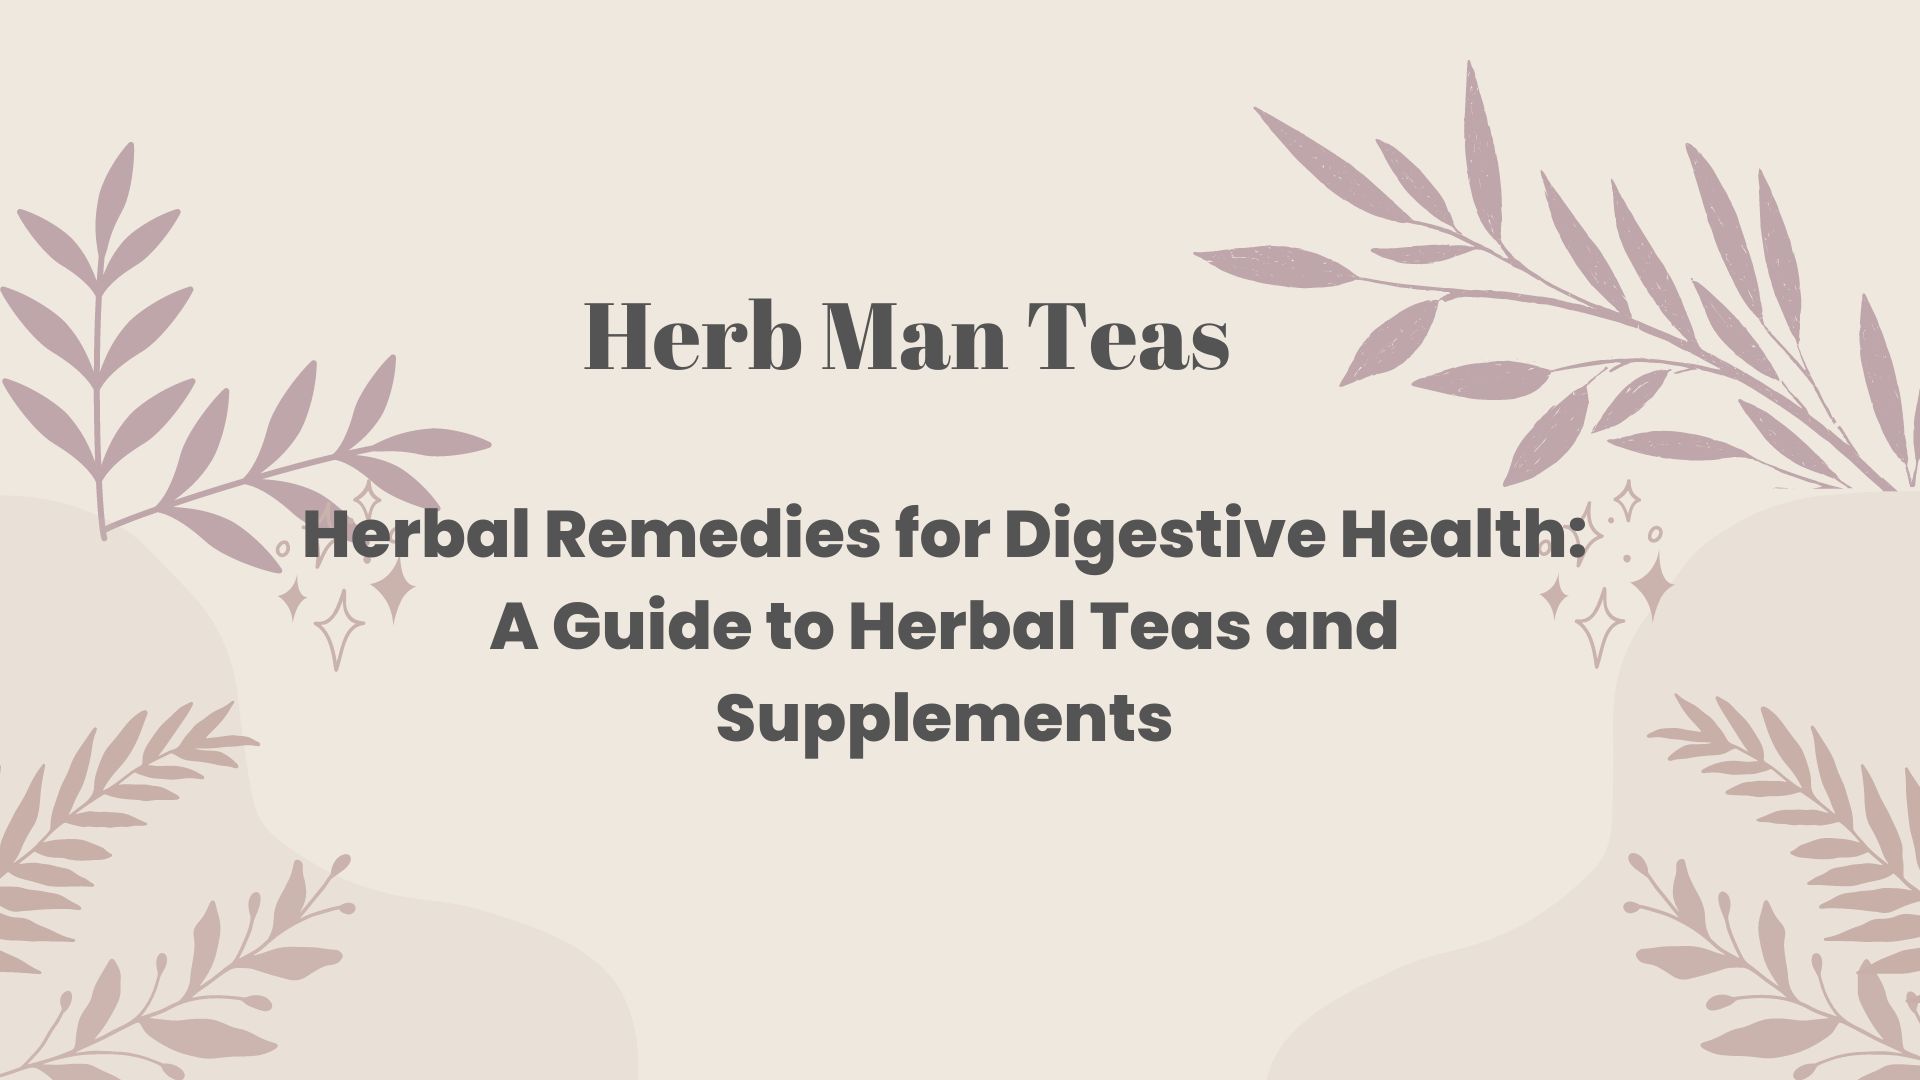 Herbal Remedies for Digestive Health: A Guide to Herbal Teas and Supplements